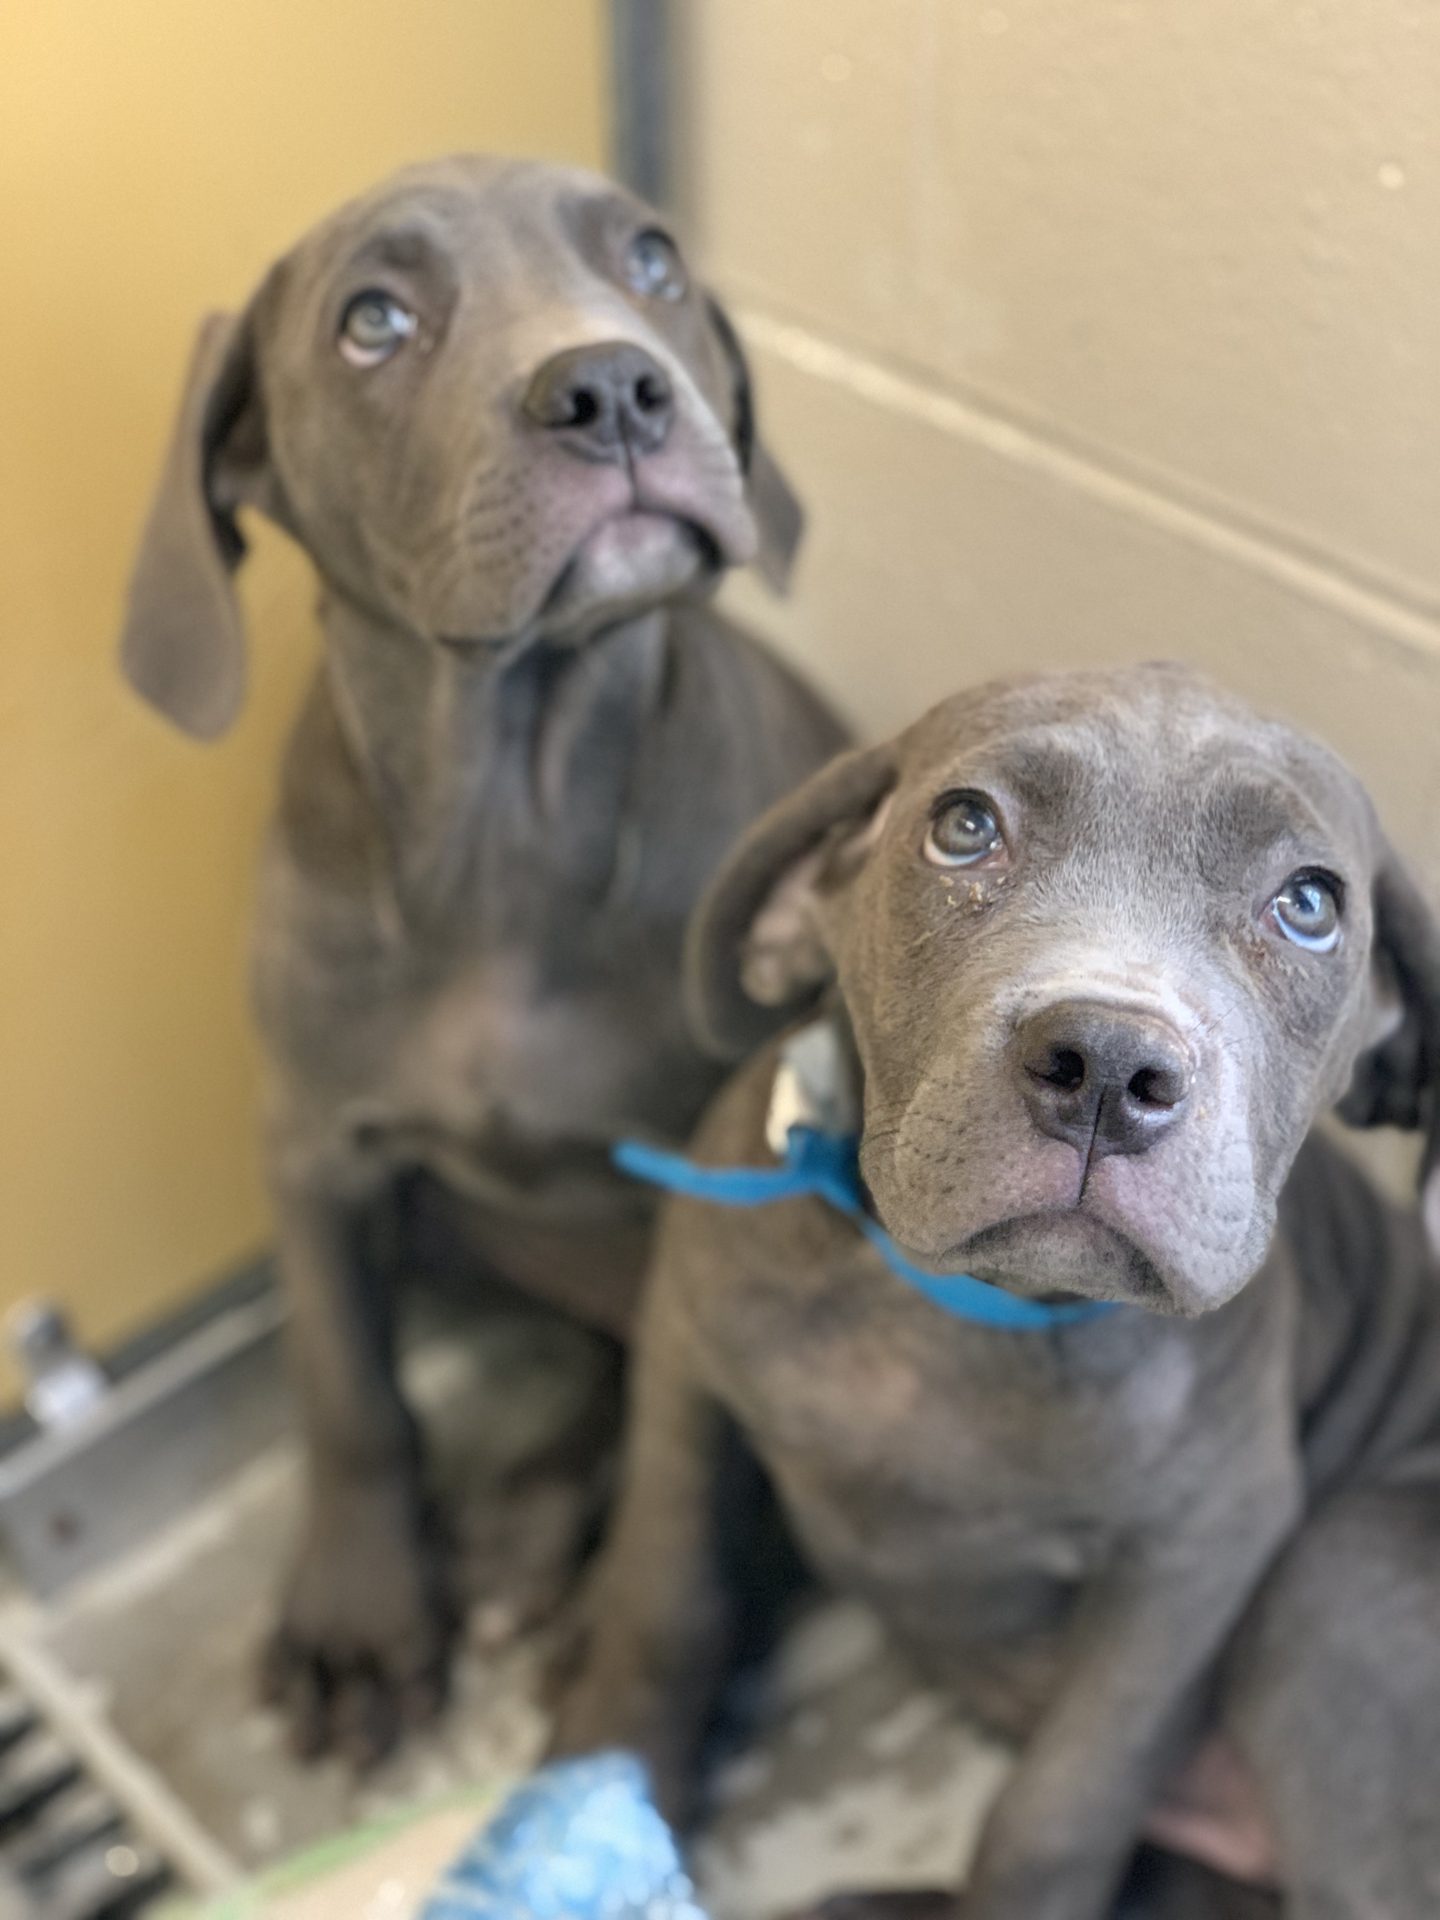 Two of the 55 dogs seized from a home in Narvon, Lancaster County by animal welfare workers on Wednesday, September 4th, 2019.